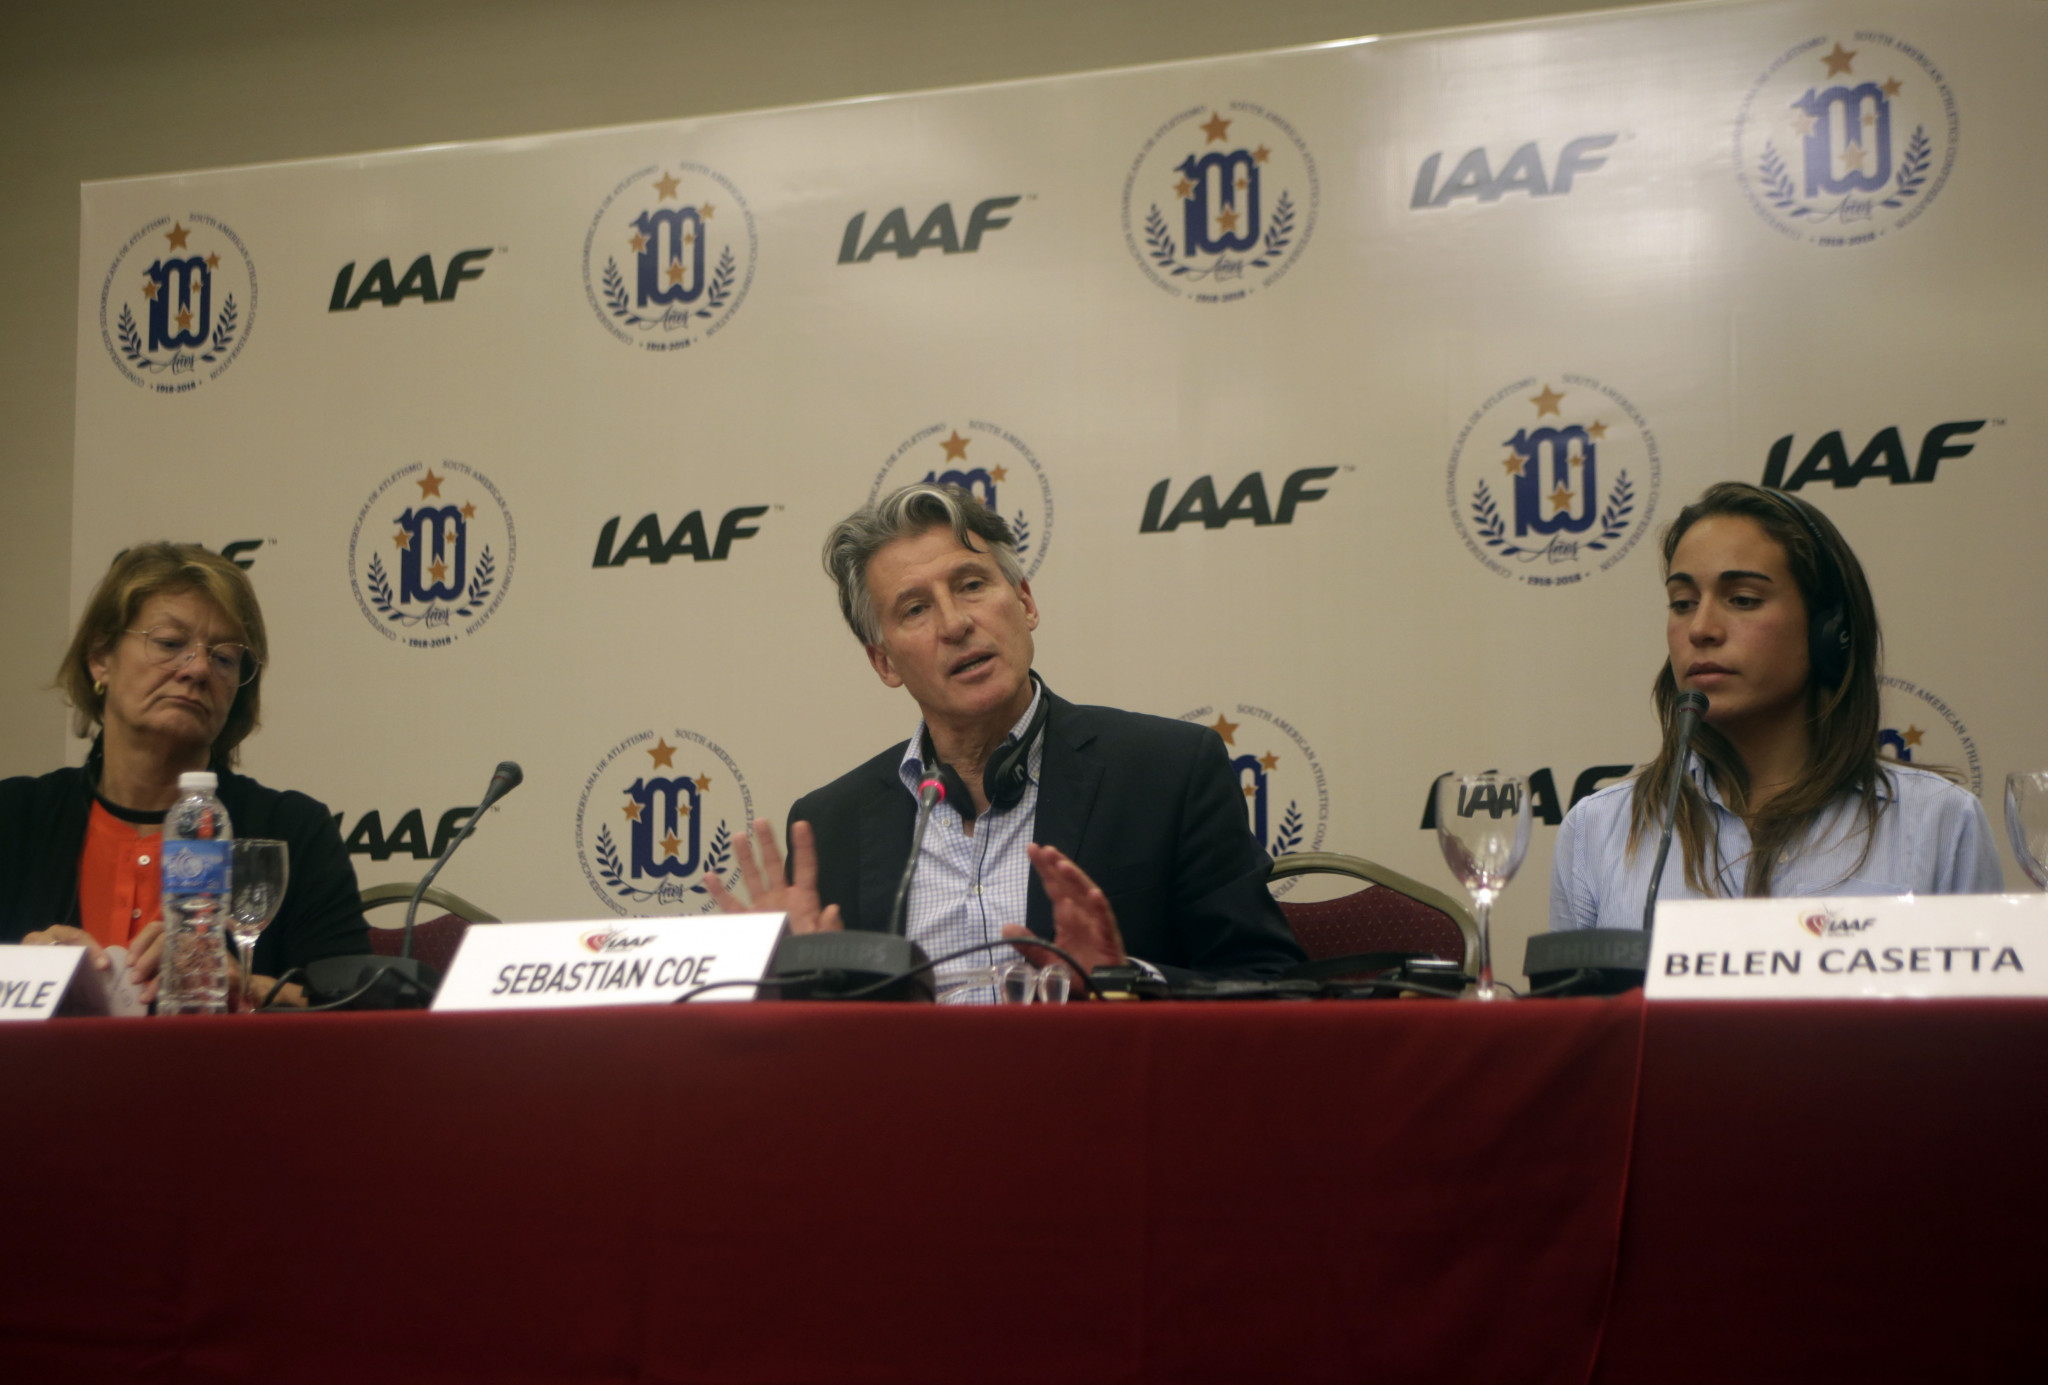 Russia hopeful of IAAF lifting ban after paying outstanding bill but new reports of suspended coaches working could delay reinstatement